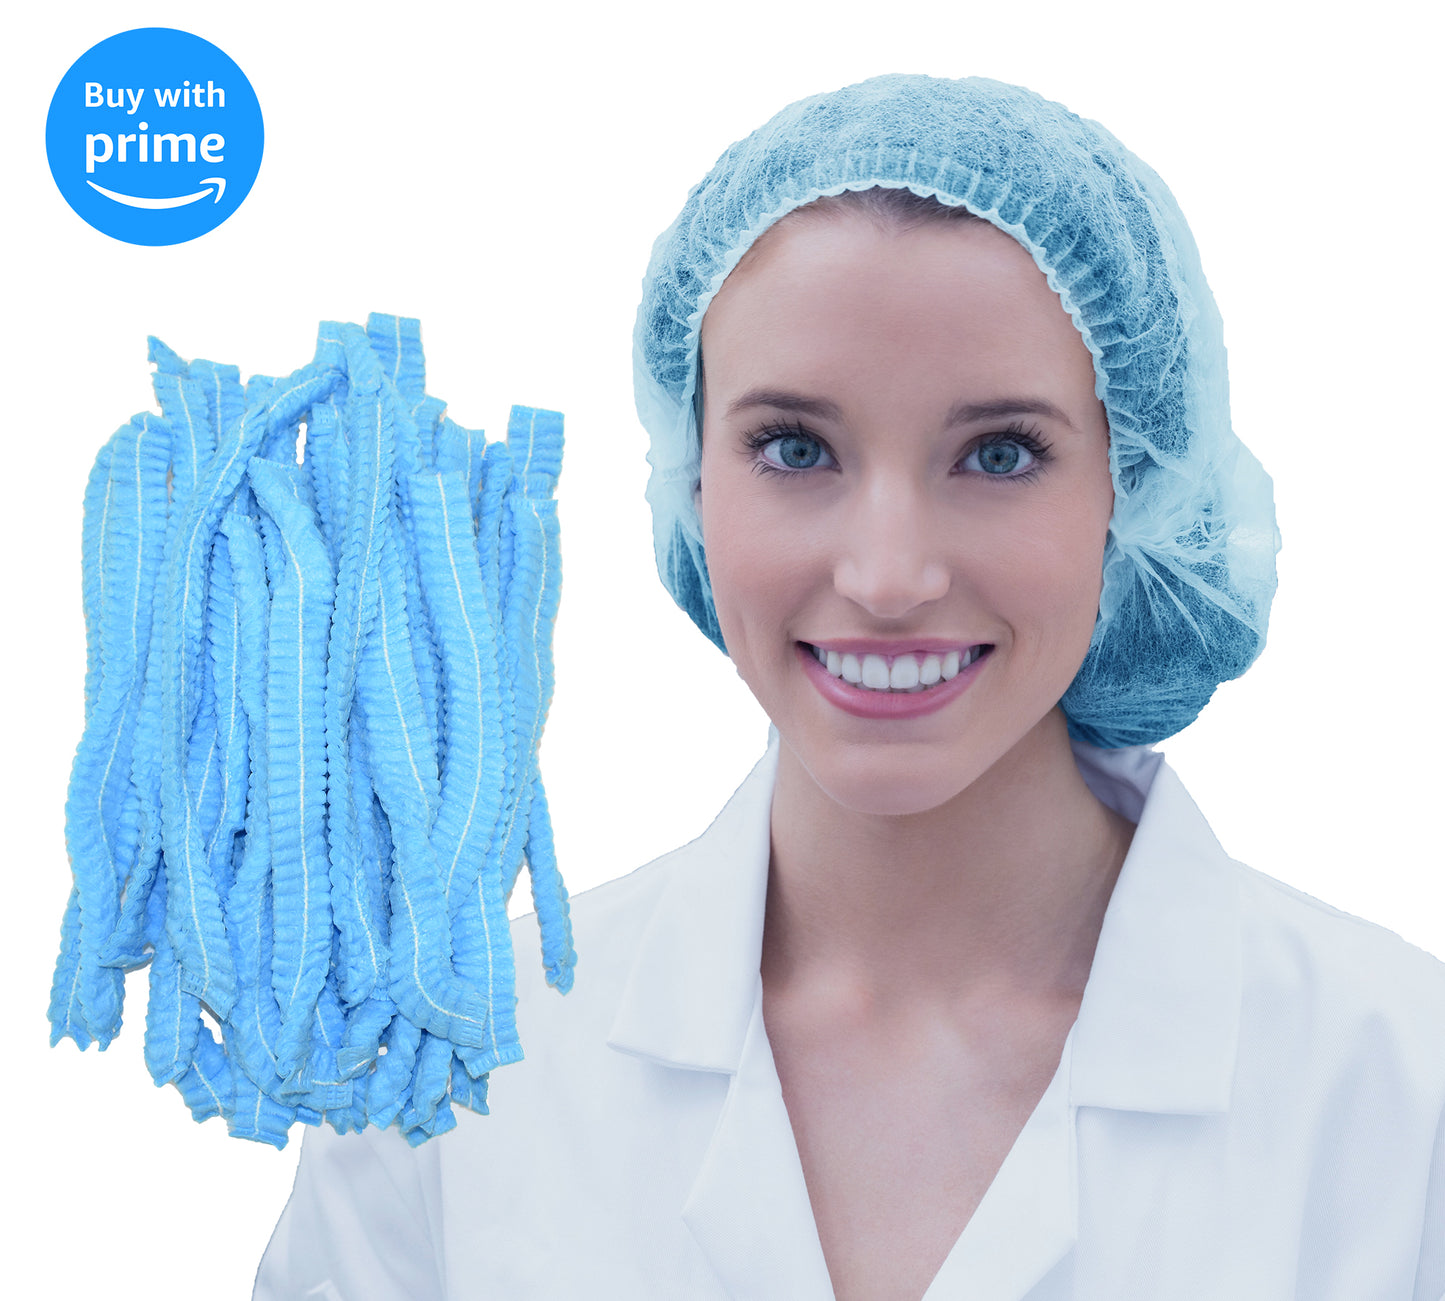 24" Disposable Bouffant Hair Nets, High Quality Breathable Material, Used in Food Service, Laboratories, Manufacturing, Beauty Salon - 100 Pieces